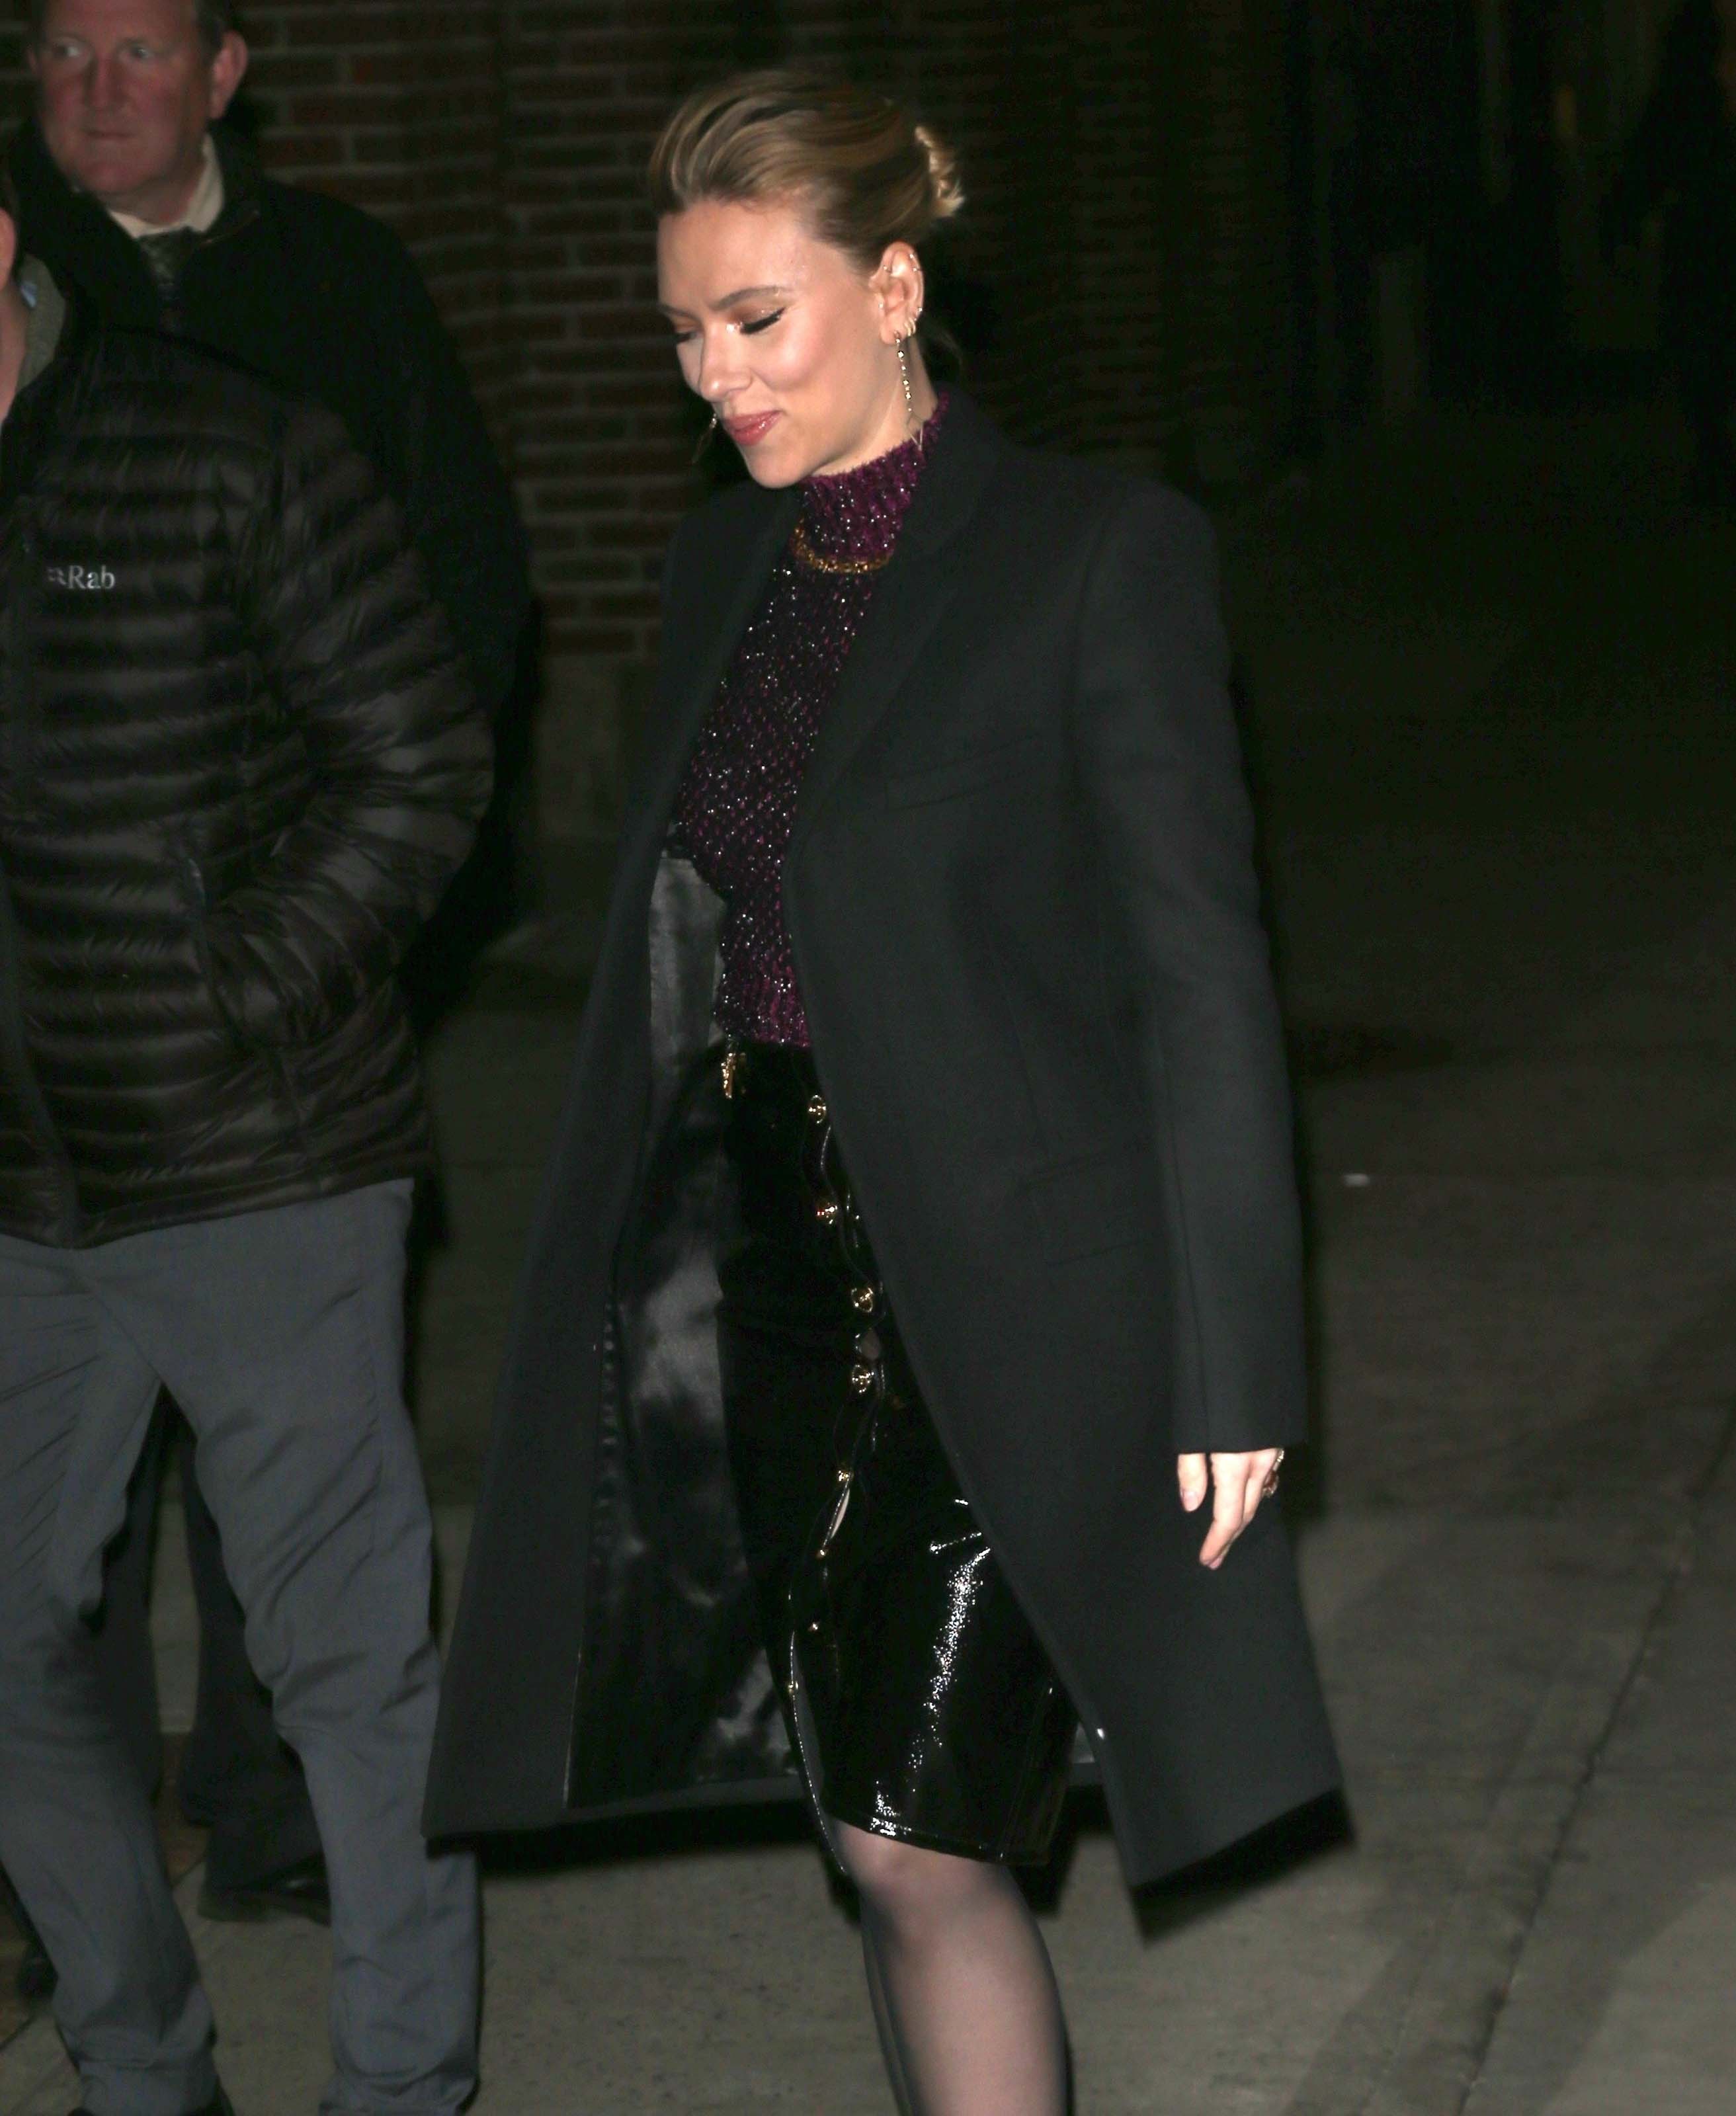 Scarlett Johansson arrives at The Late Show With Stephen Colbert’